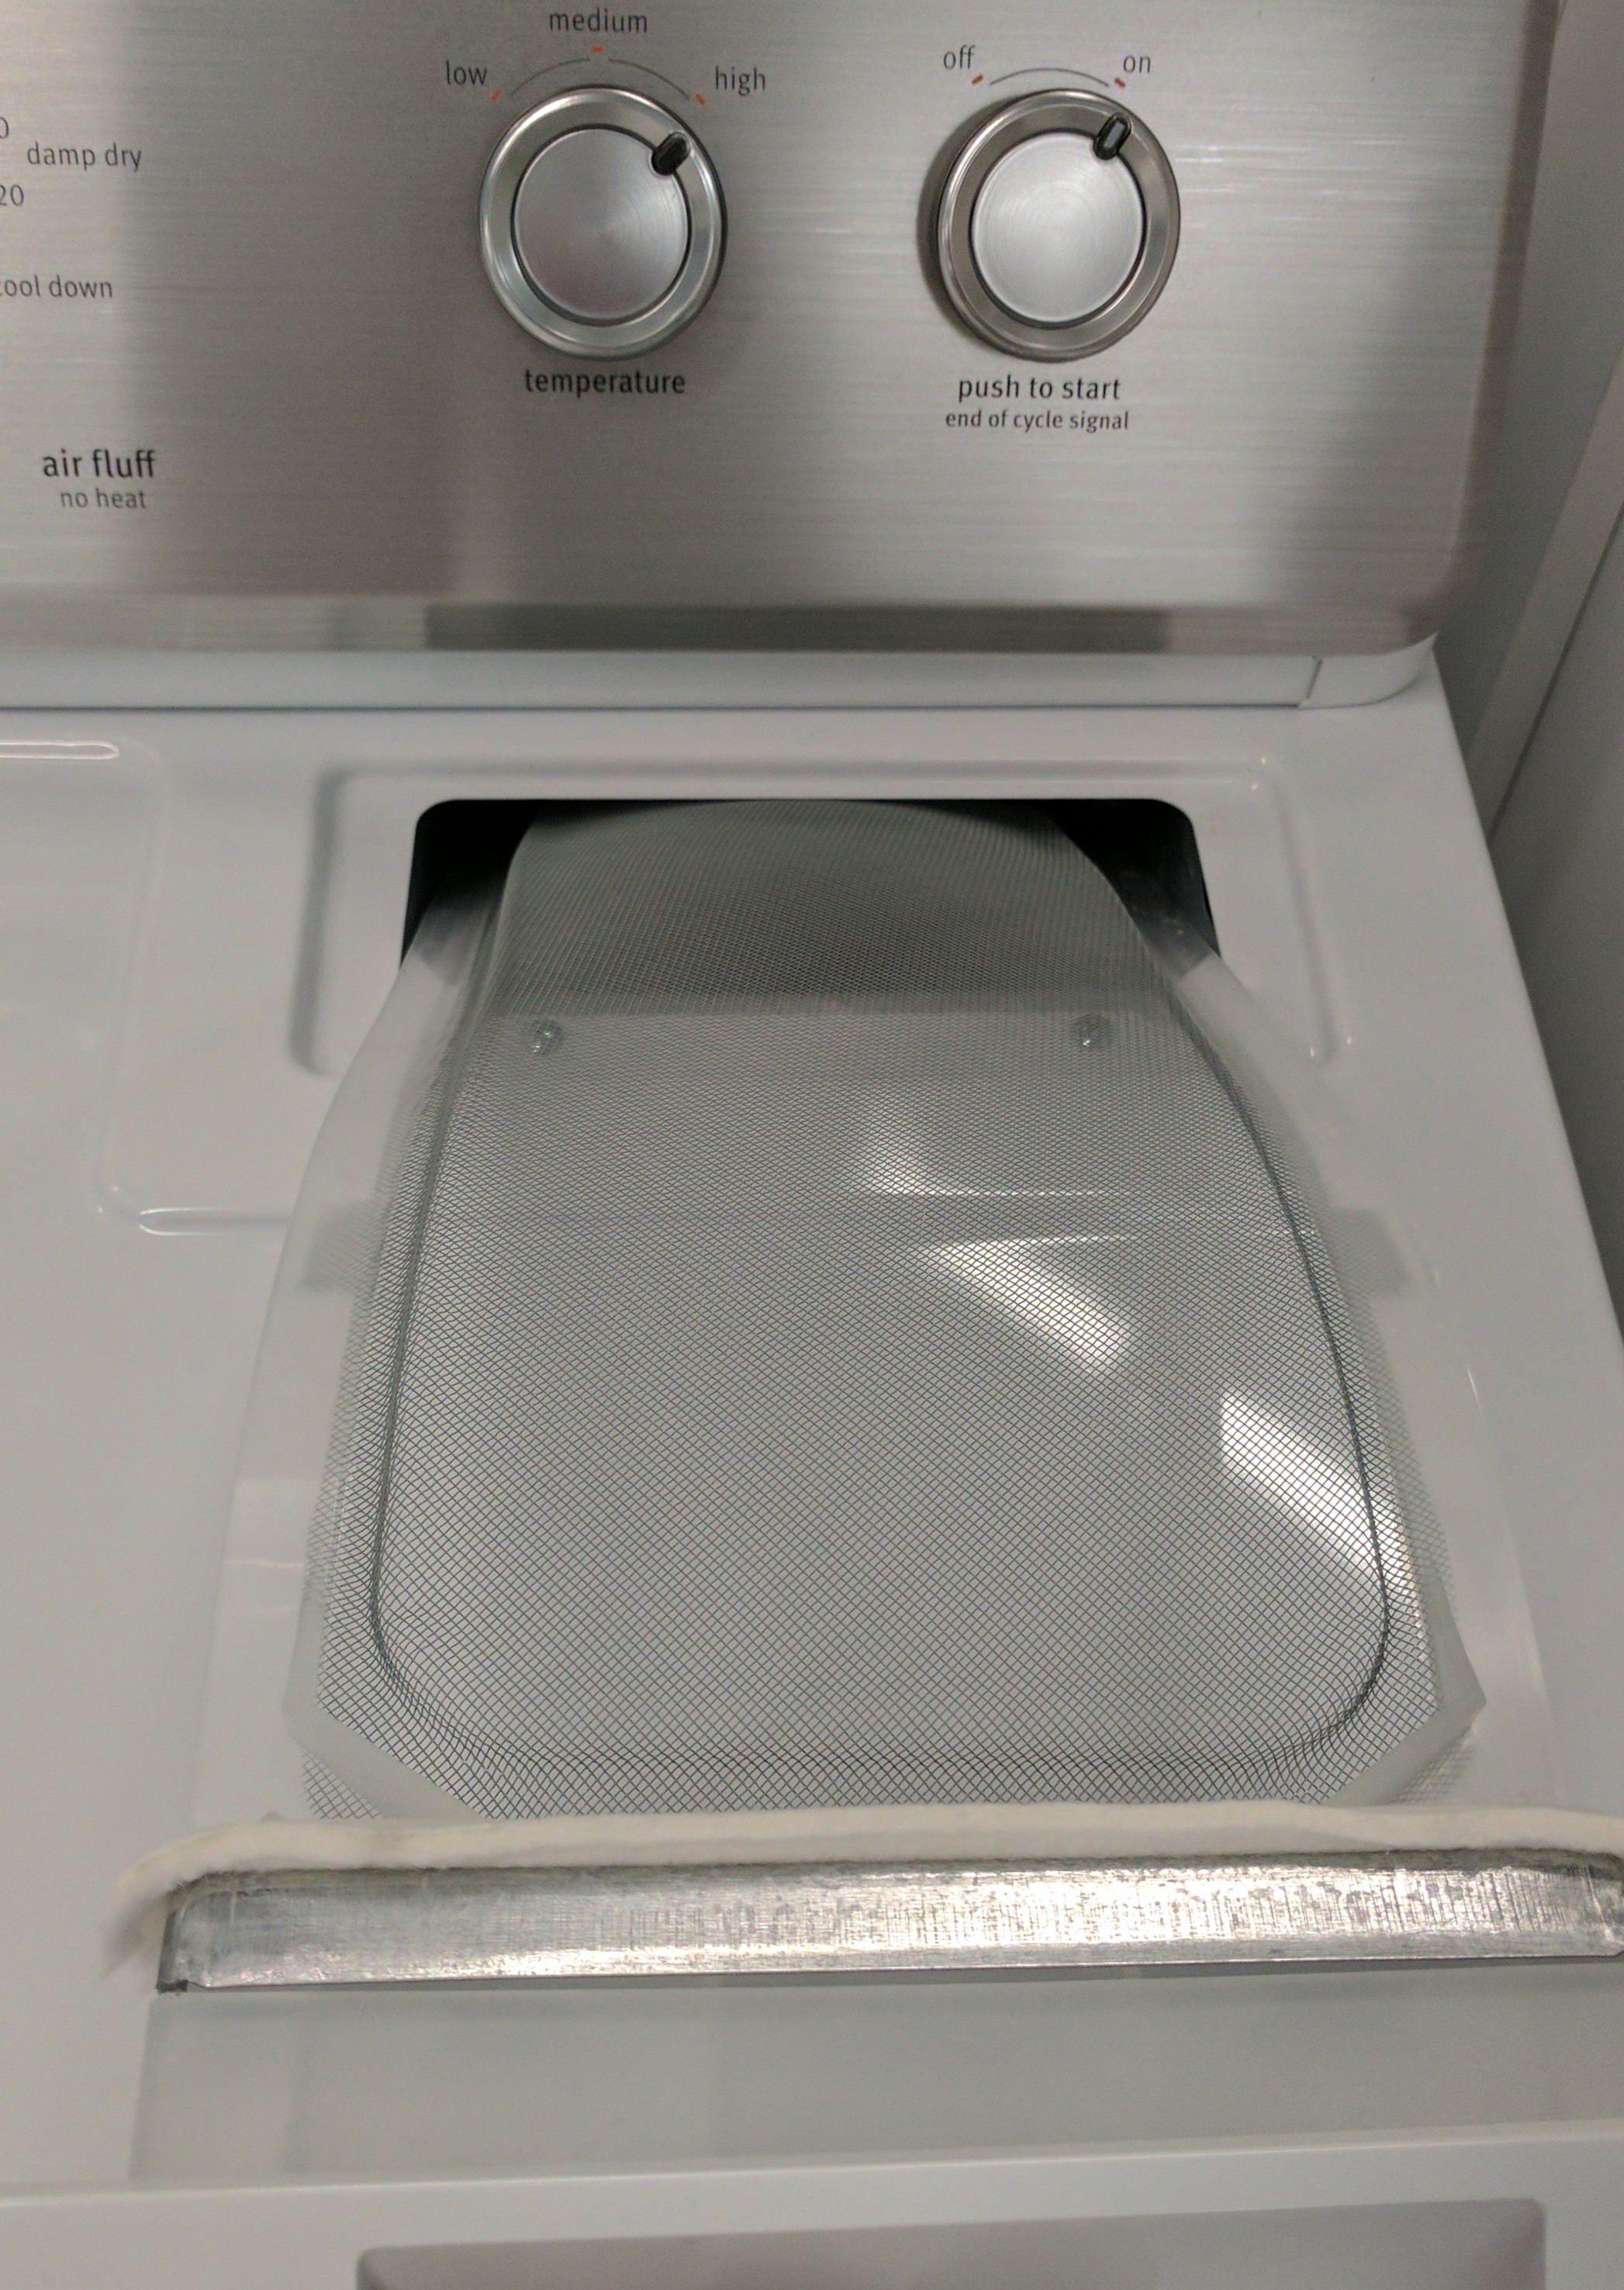 How to Clean a Dryer Lint Trap Slot